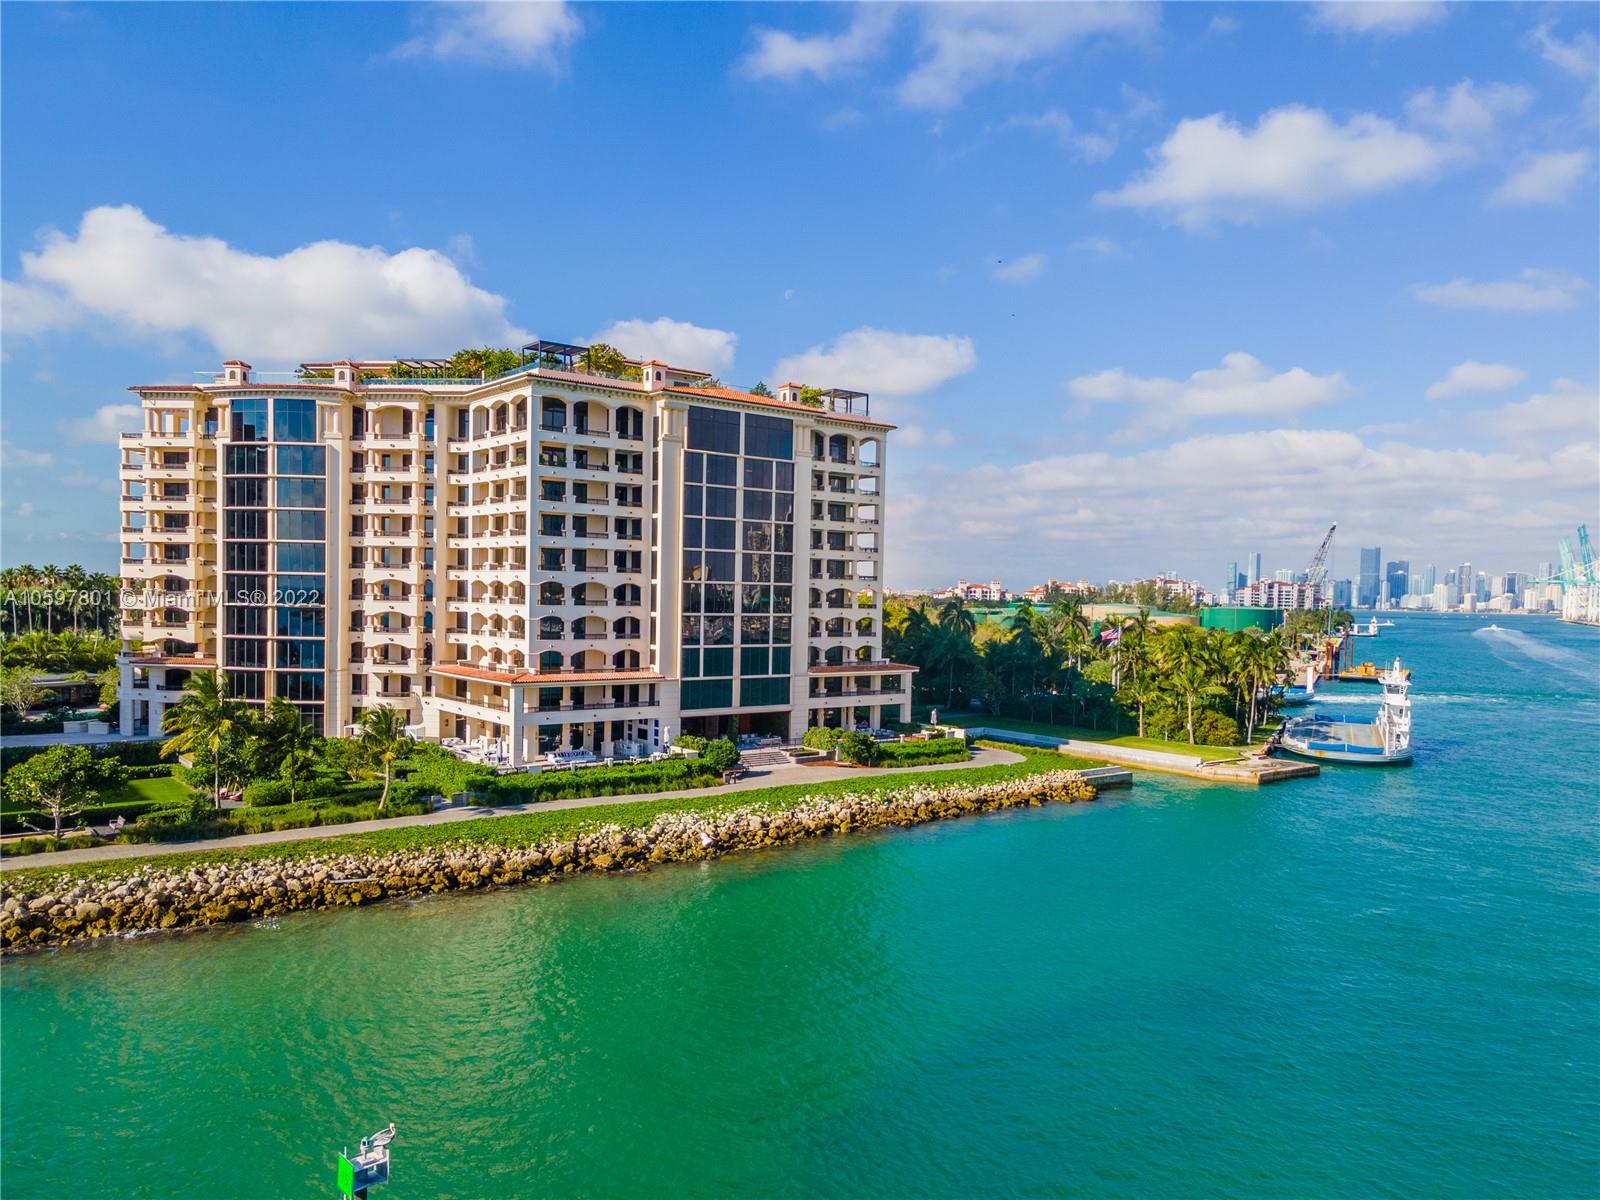 WALK RIGHT INTO BREATHTAKING OCEAN VISTAS IN ONE OF THE BEST FLOORPLANS EVER DESIGNED ON FISHER ISLAND DESIGNED BY CHAHAN MINASSIAN! Located in One of the Most Desireable Buildings that This Spacious 4 Bedroom + 5.5 Baths Split Floorplan in 6,170 SF of Living Space. The Residence Boasts Unobstructed Views of the Island’s Mile-long Beach, Biscayne Bay & Golf Course. Dine & Entertain in Generous Exterior Terraces that Wrap Residence with Double Exposures & a Hot Tub Overlooking the Beach for Ideal Indoor/Outdoor Lifestyle. Cabochon Limestone Floors & Detailed Moldings in Soft Cream Tones. Double Facing Fireplace in Grand Living Area, Wet Bar, Huge Eat-in Kitchen & Dining Area/Family Room. Timeless Living Comfort Perfect for Families. Parking for 2 Cars & 1 Golf Cart + 1 Storage Space.